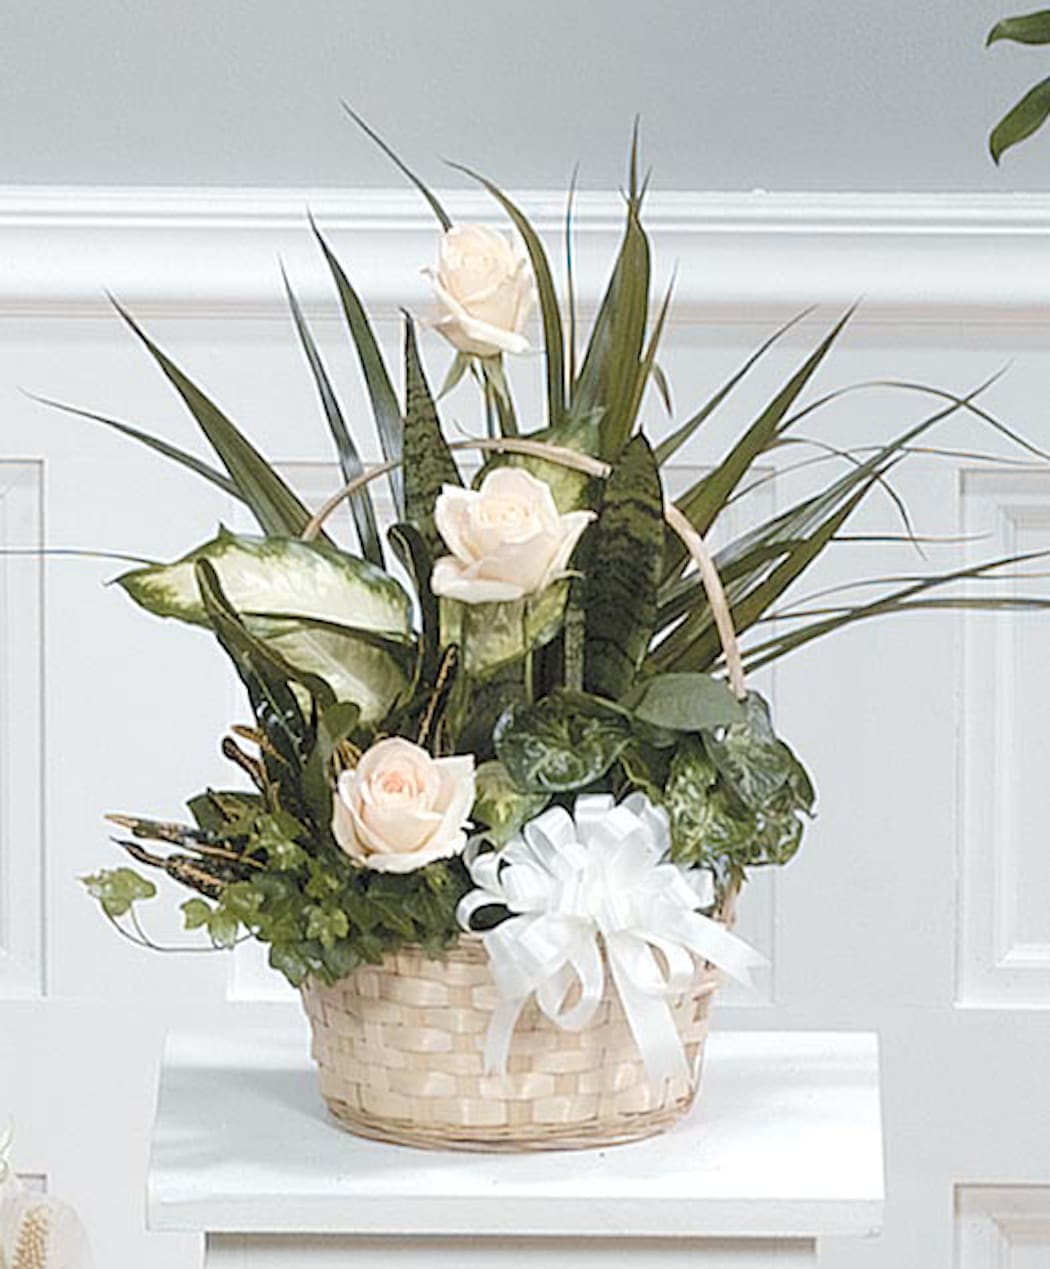 Angel Garden Basket - Lush Roses embraced by a tropical array of garden plants create a peaceful remembrance for home or garden.  8' dish garden basket (Contents, container, and size may vary).